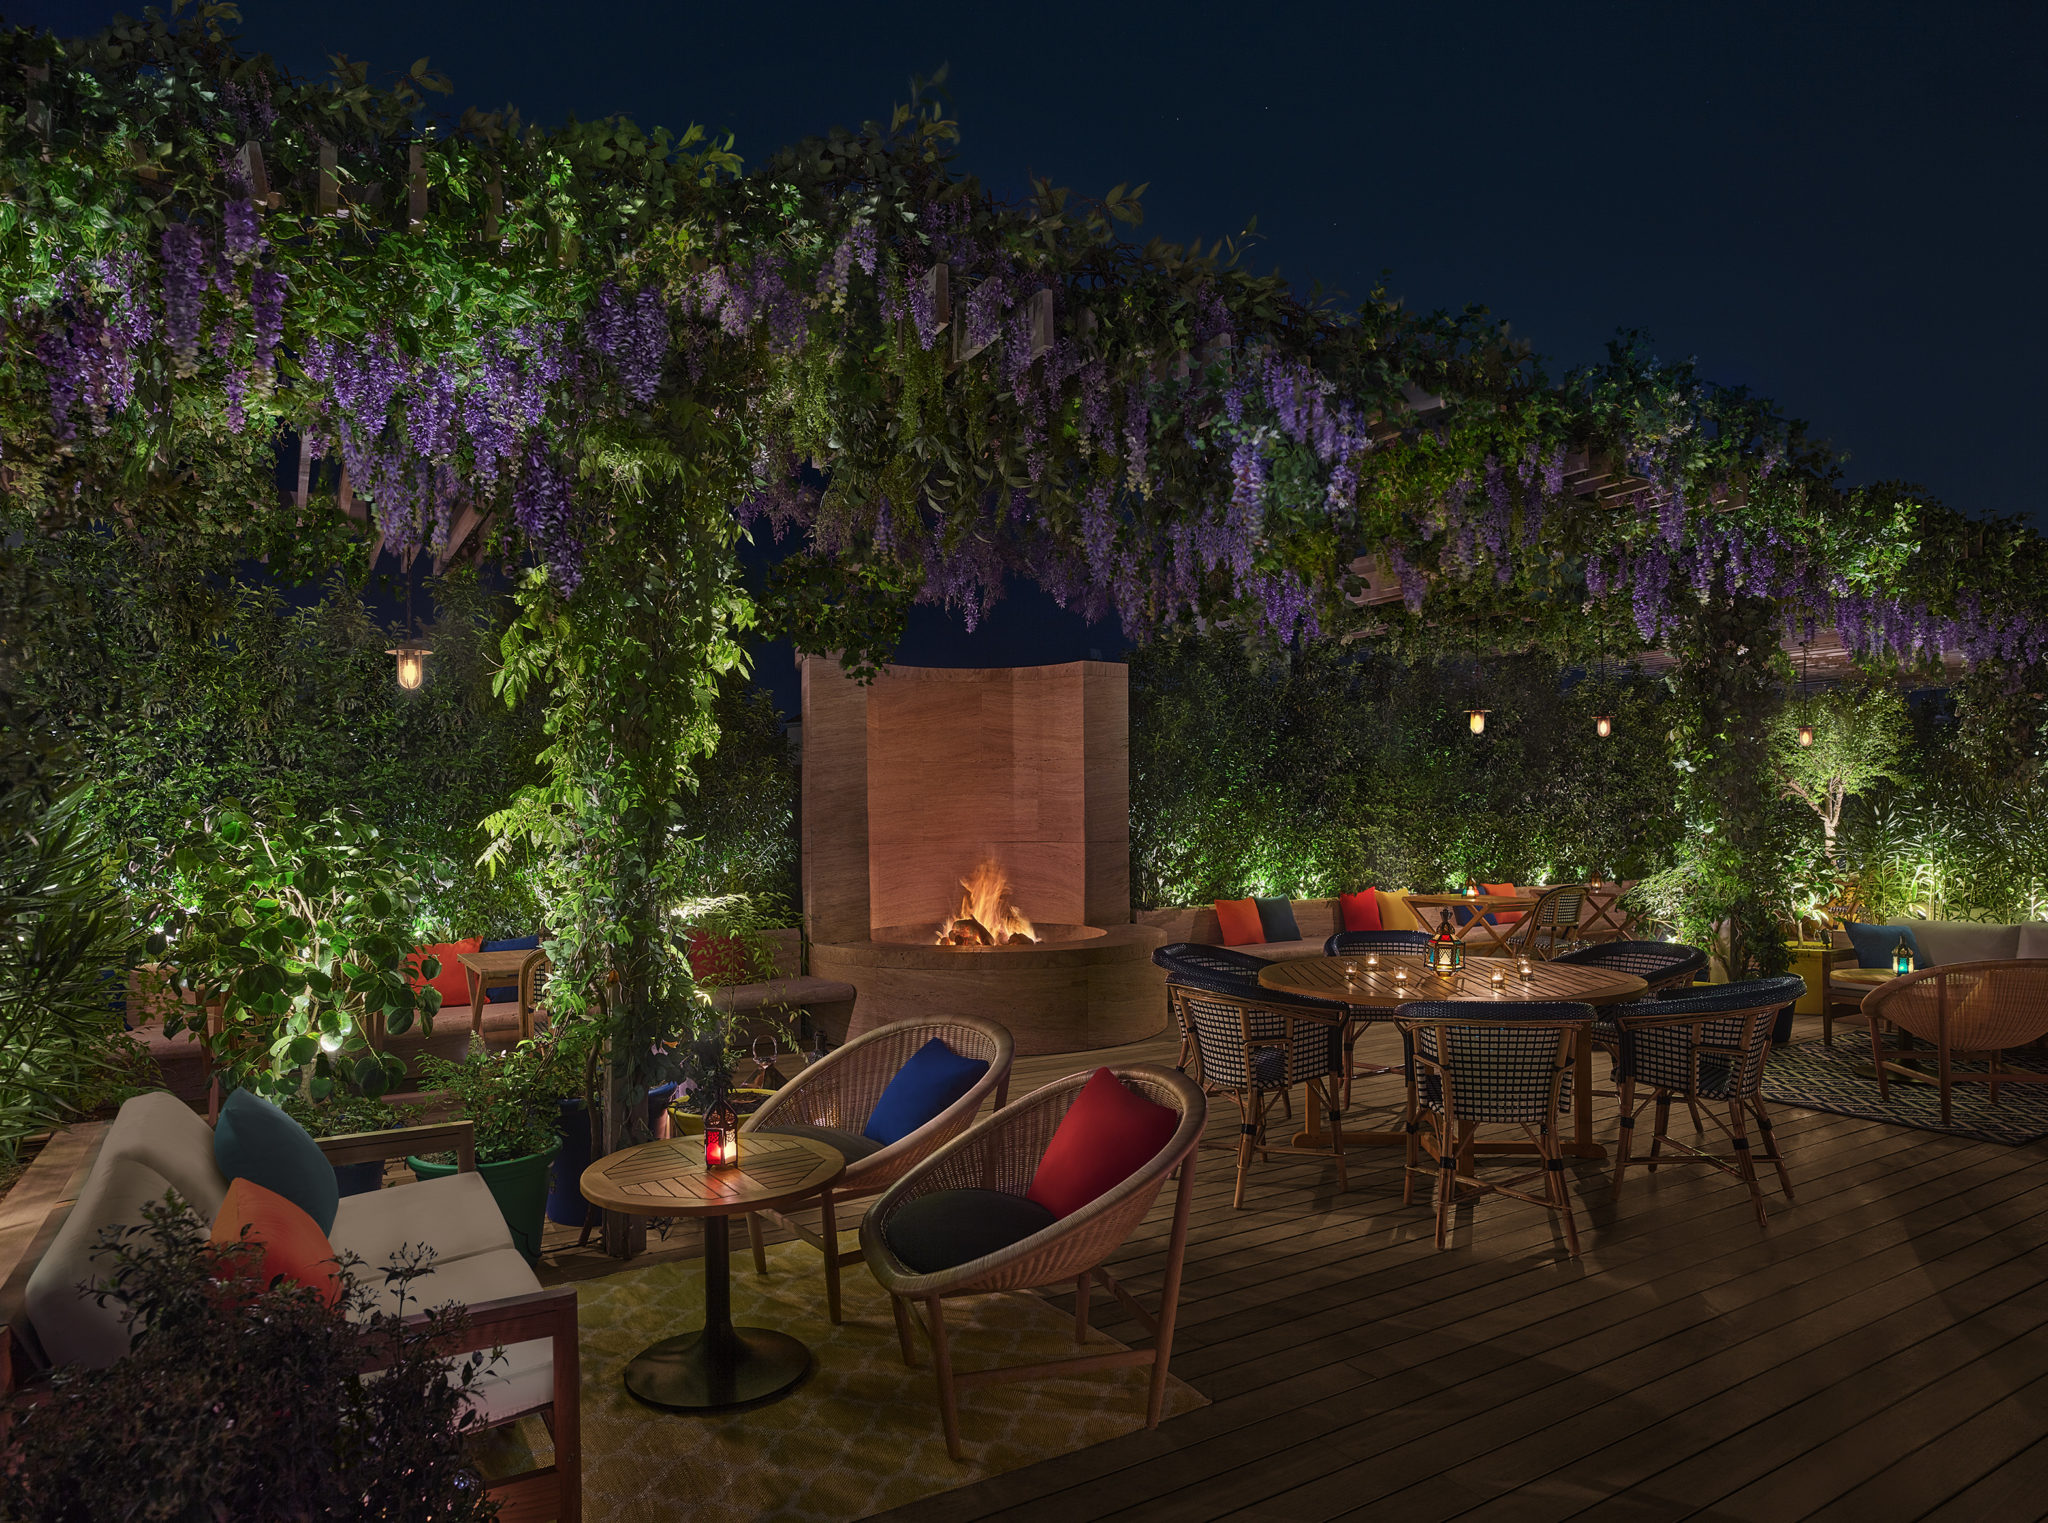 Outdoor dining area with hanging garden and fireplace at night